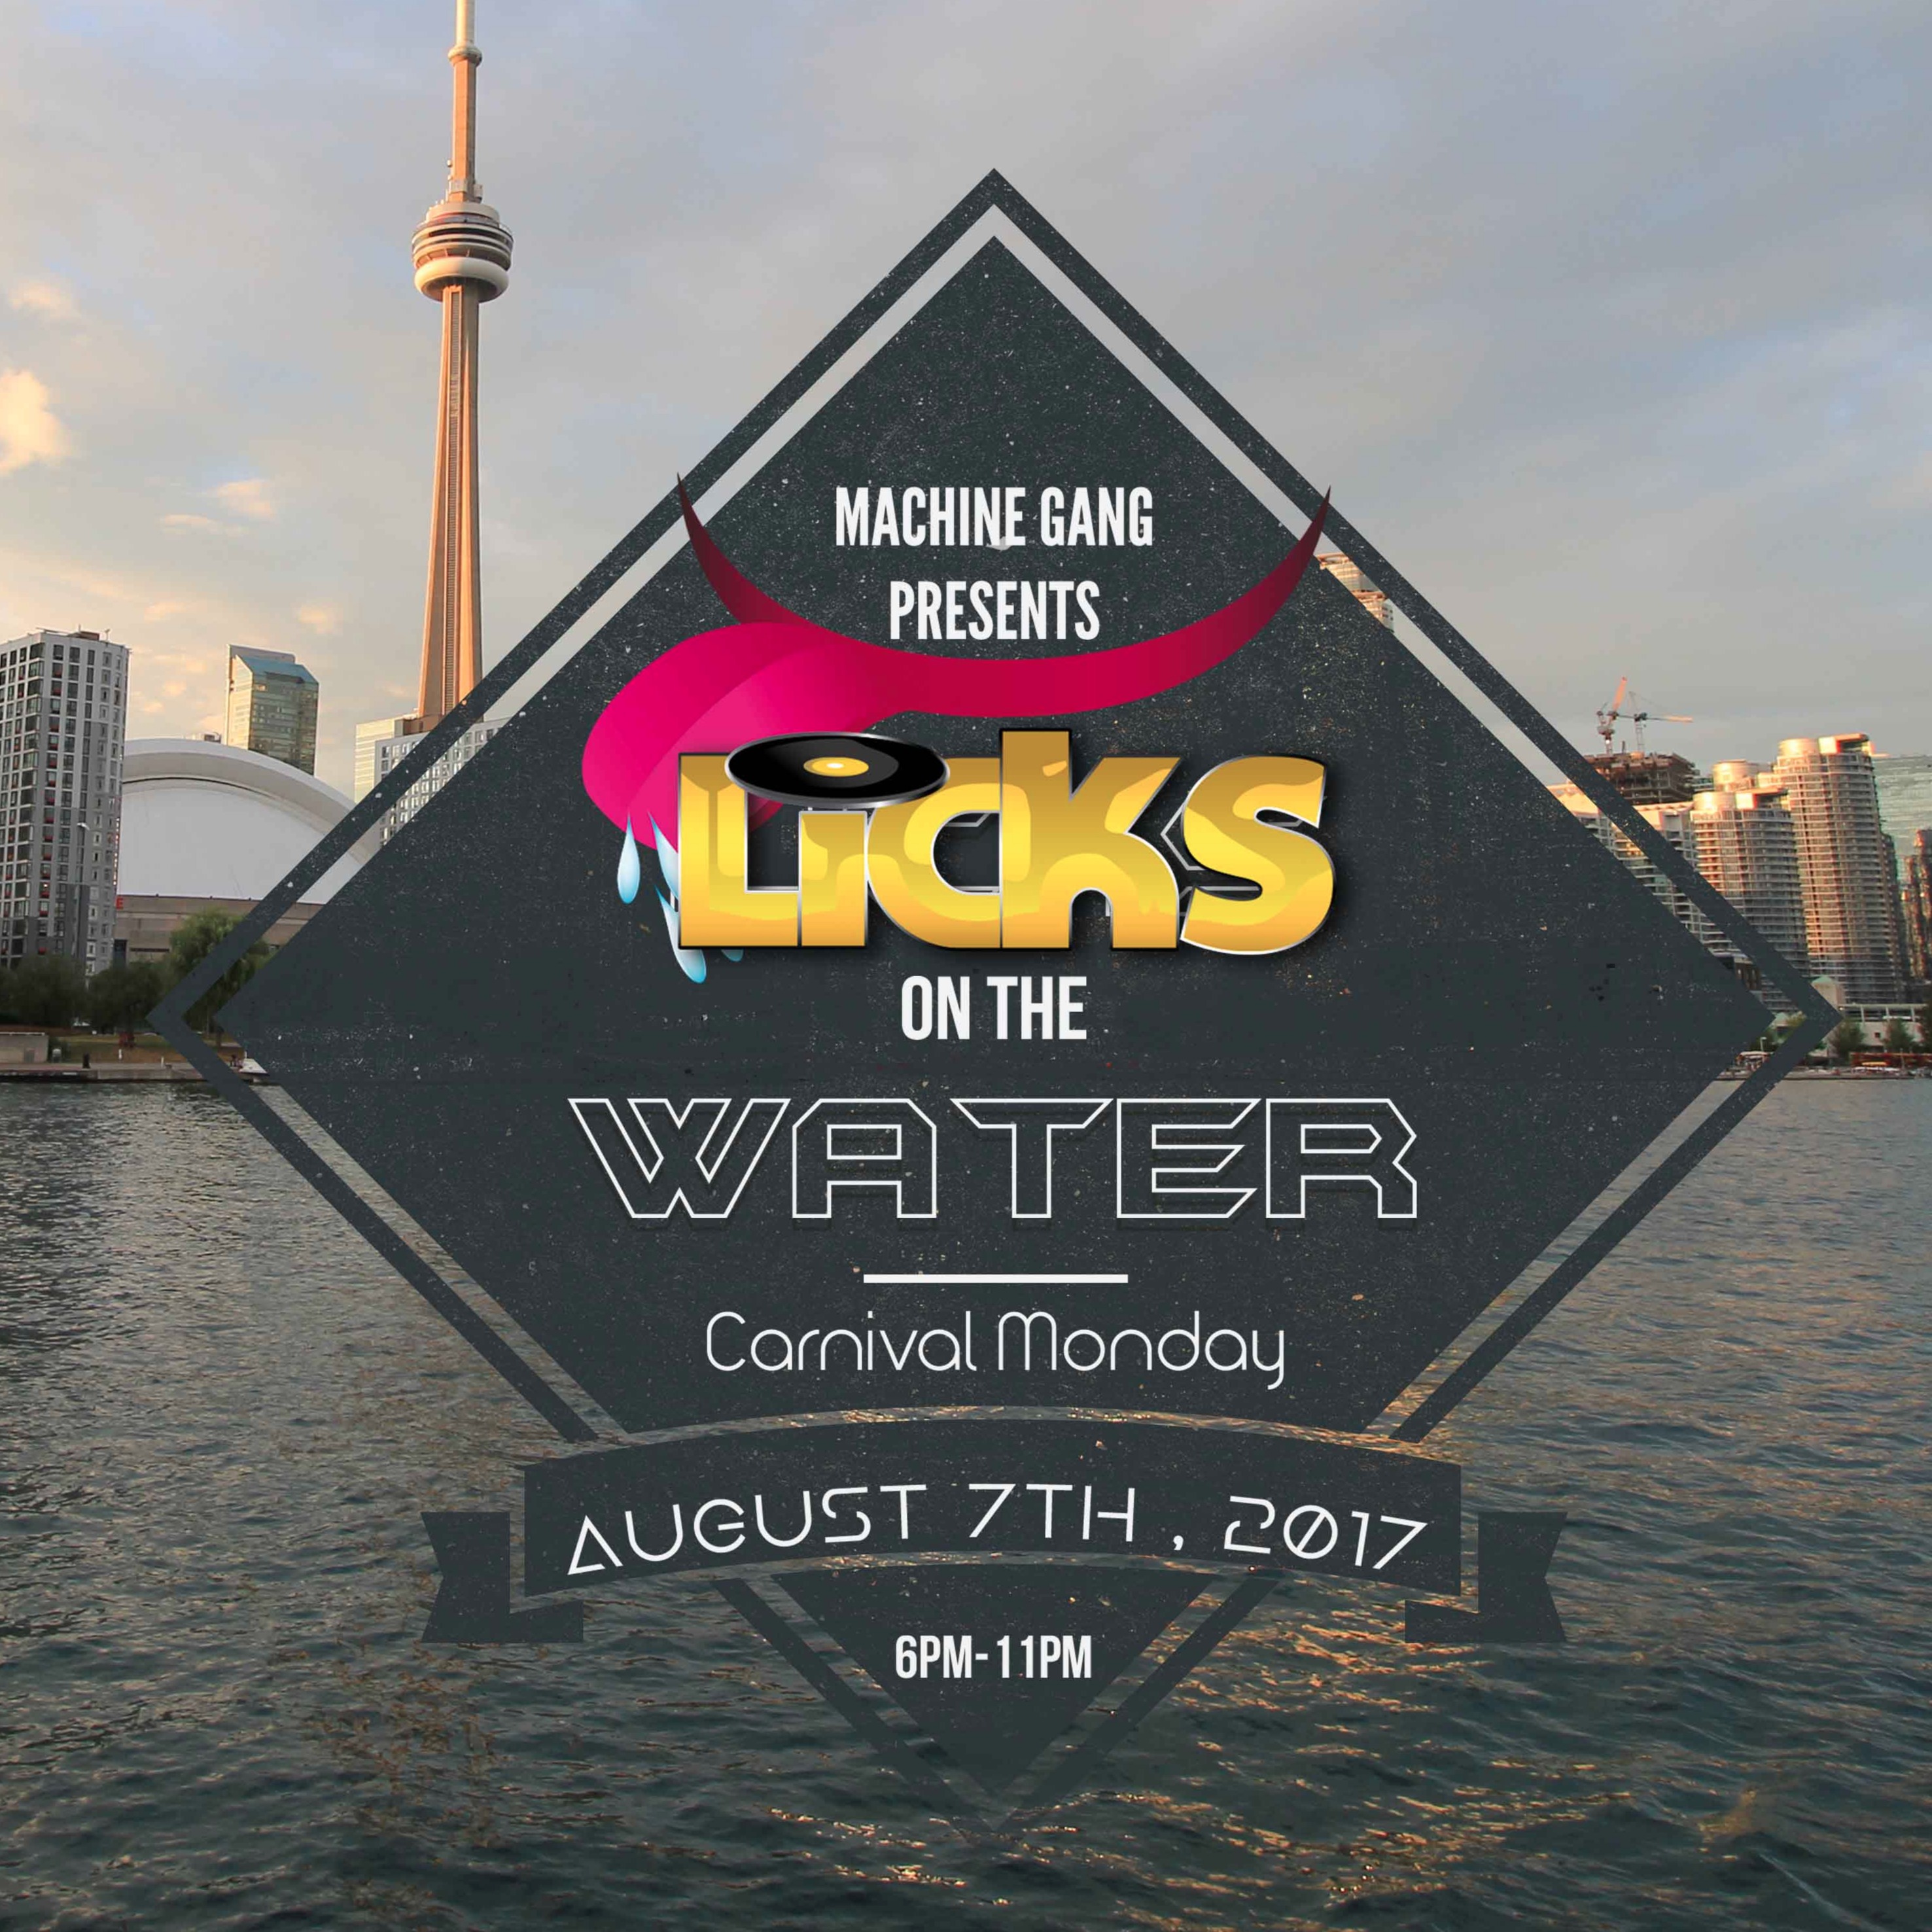 LiCKS ON THE WATER - first annual boat ride #LiCKSonTheWater